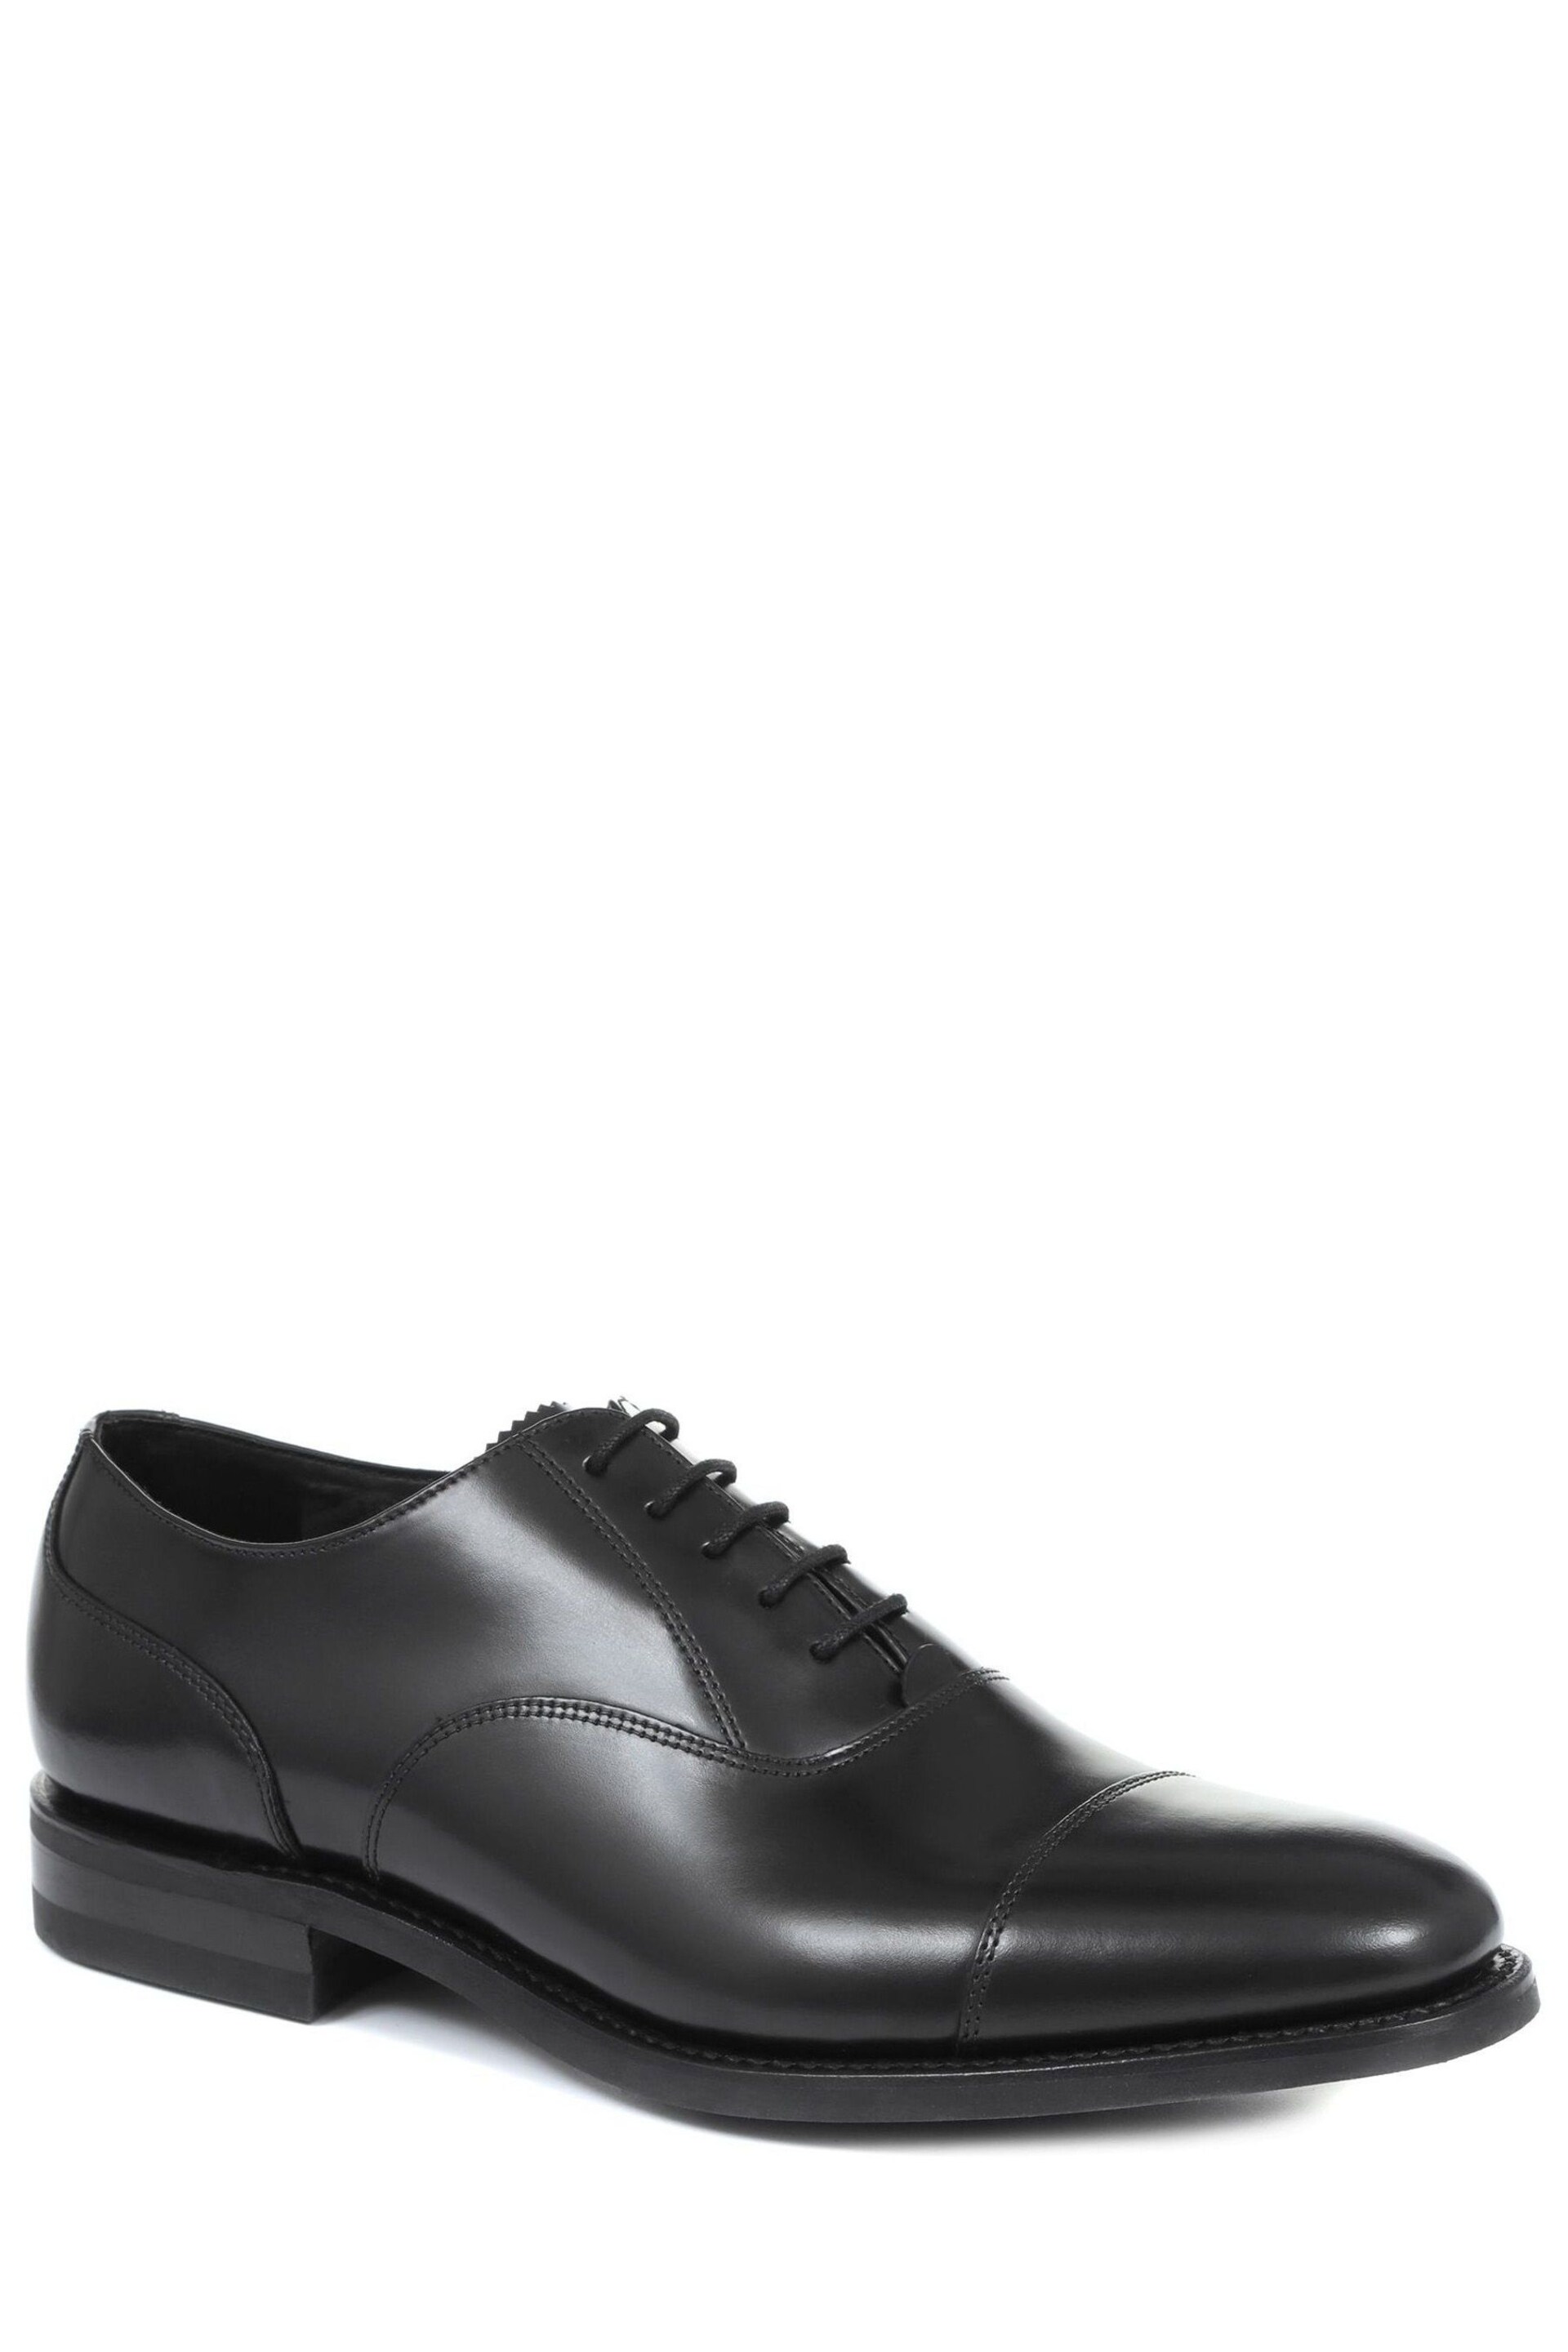 Design Loake by Jones Bootmaker Black Comanche Wide Fit Goodyear Welted Leather Oxford Shoes - Image 2 of 5